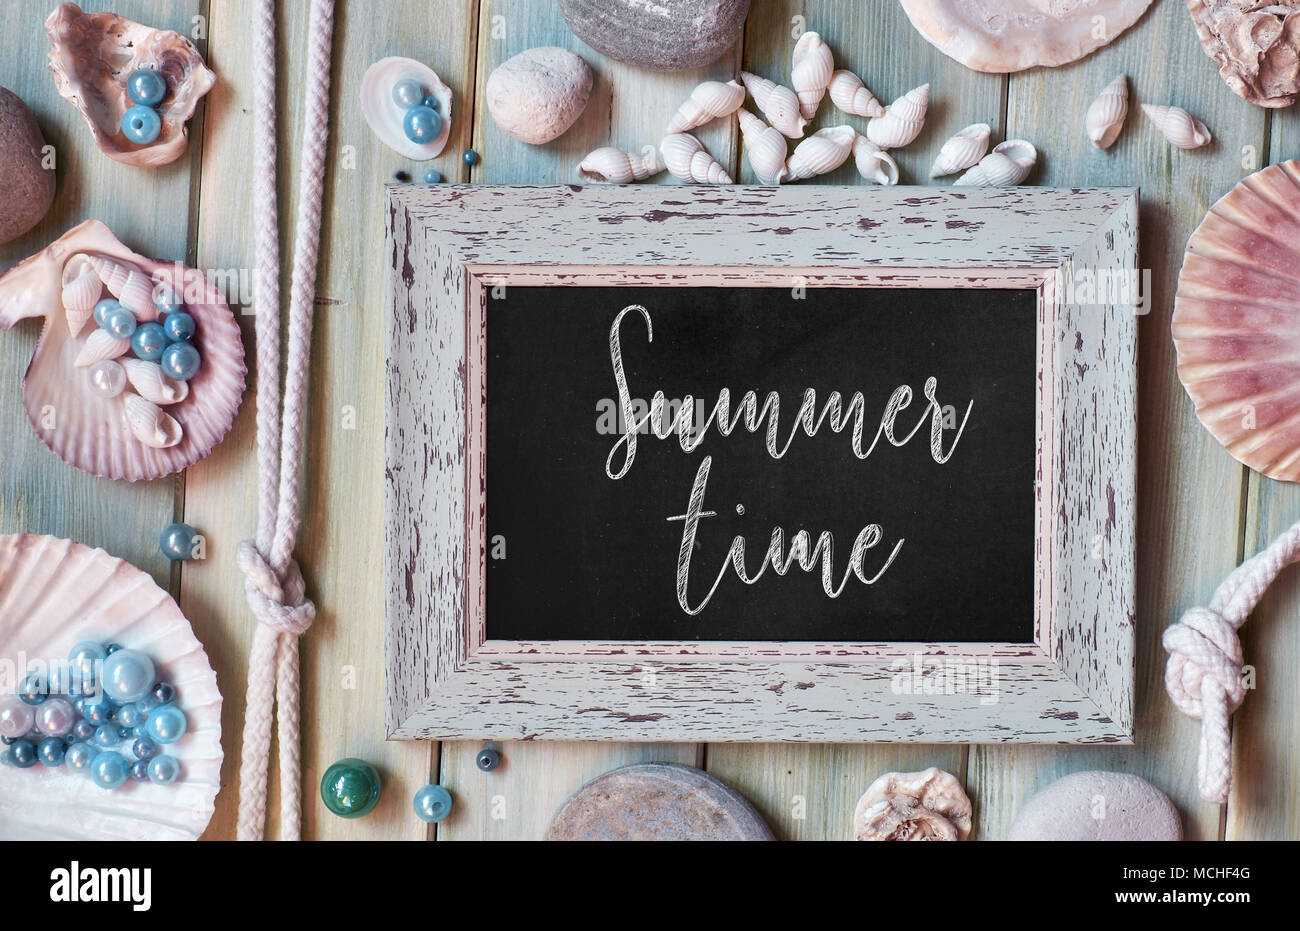 Blackboard with 'Summer time' chalk text, with sea shells, rope and star fish on light wooden background Stock Photo